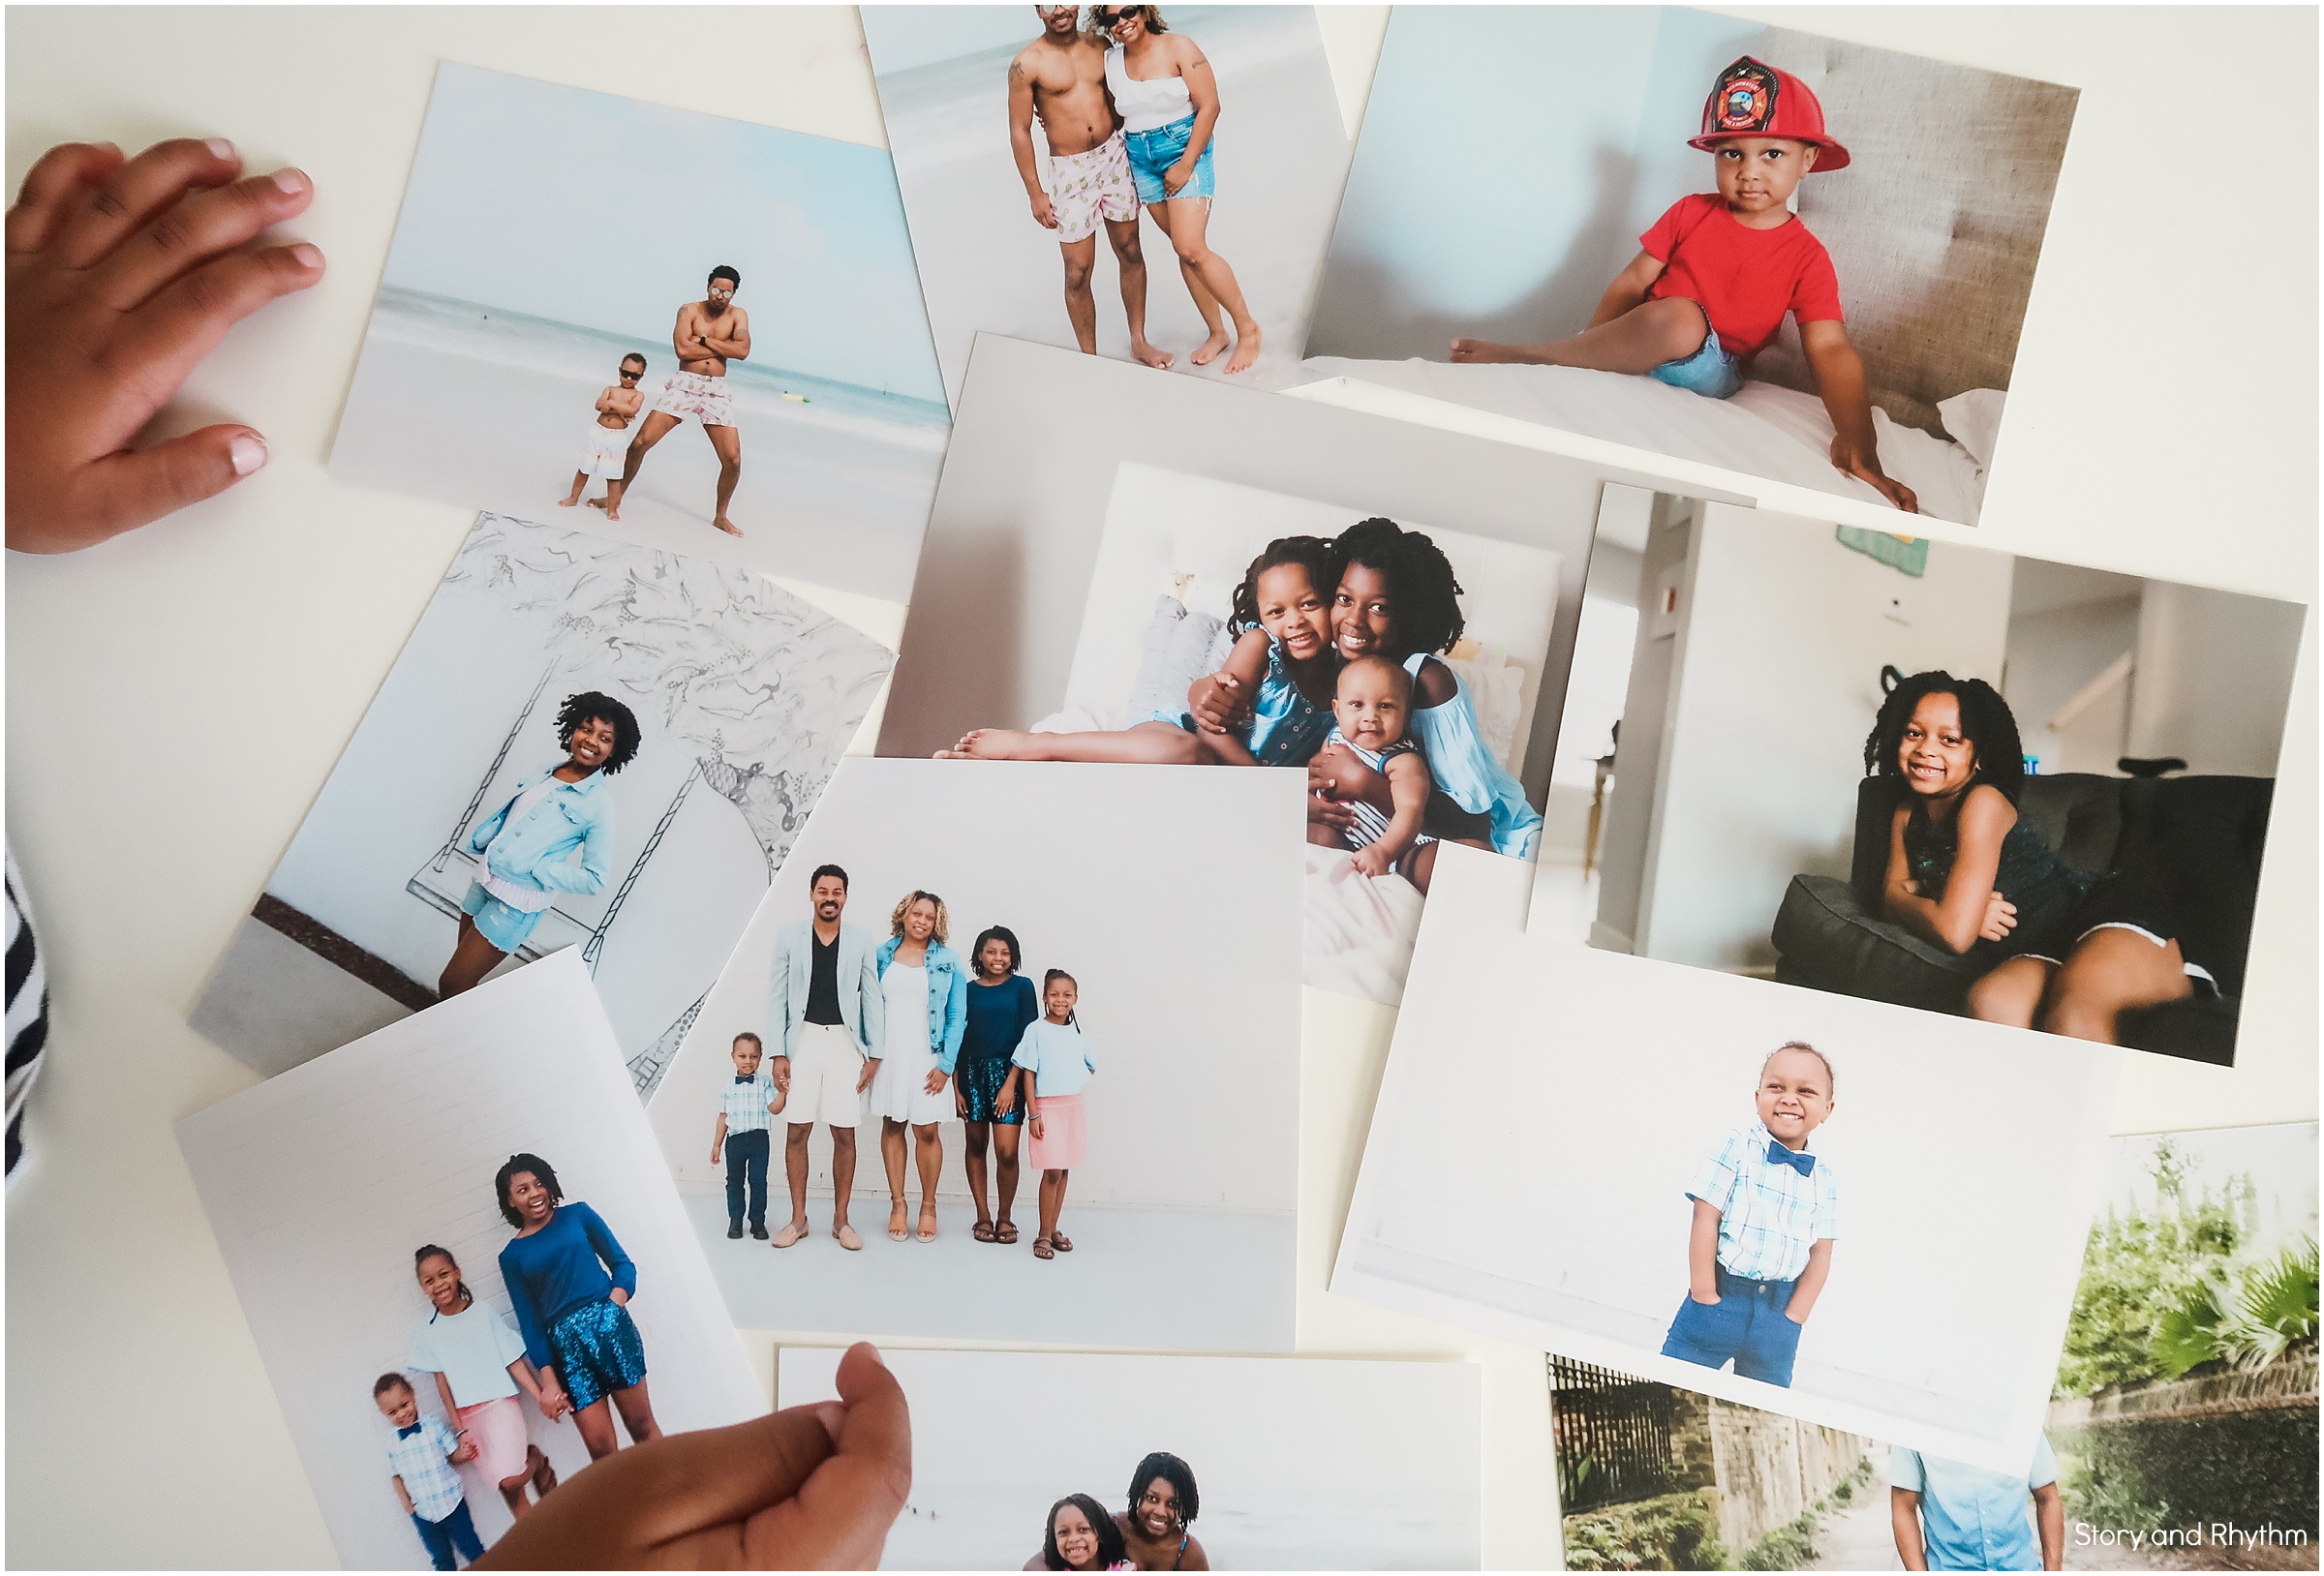 Printing digital photos of your family